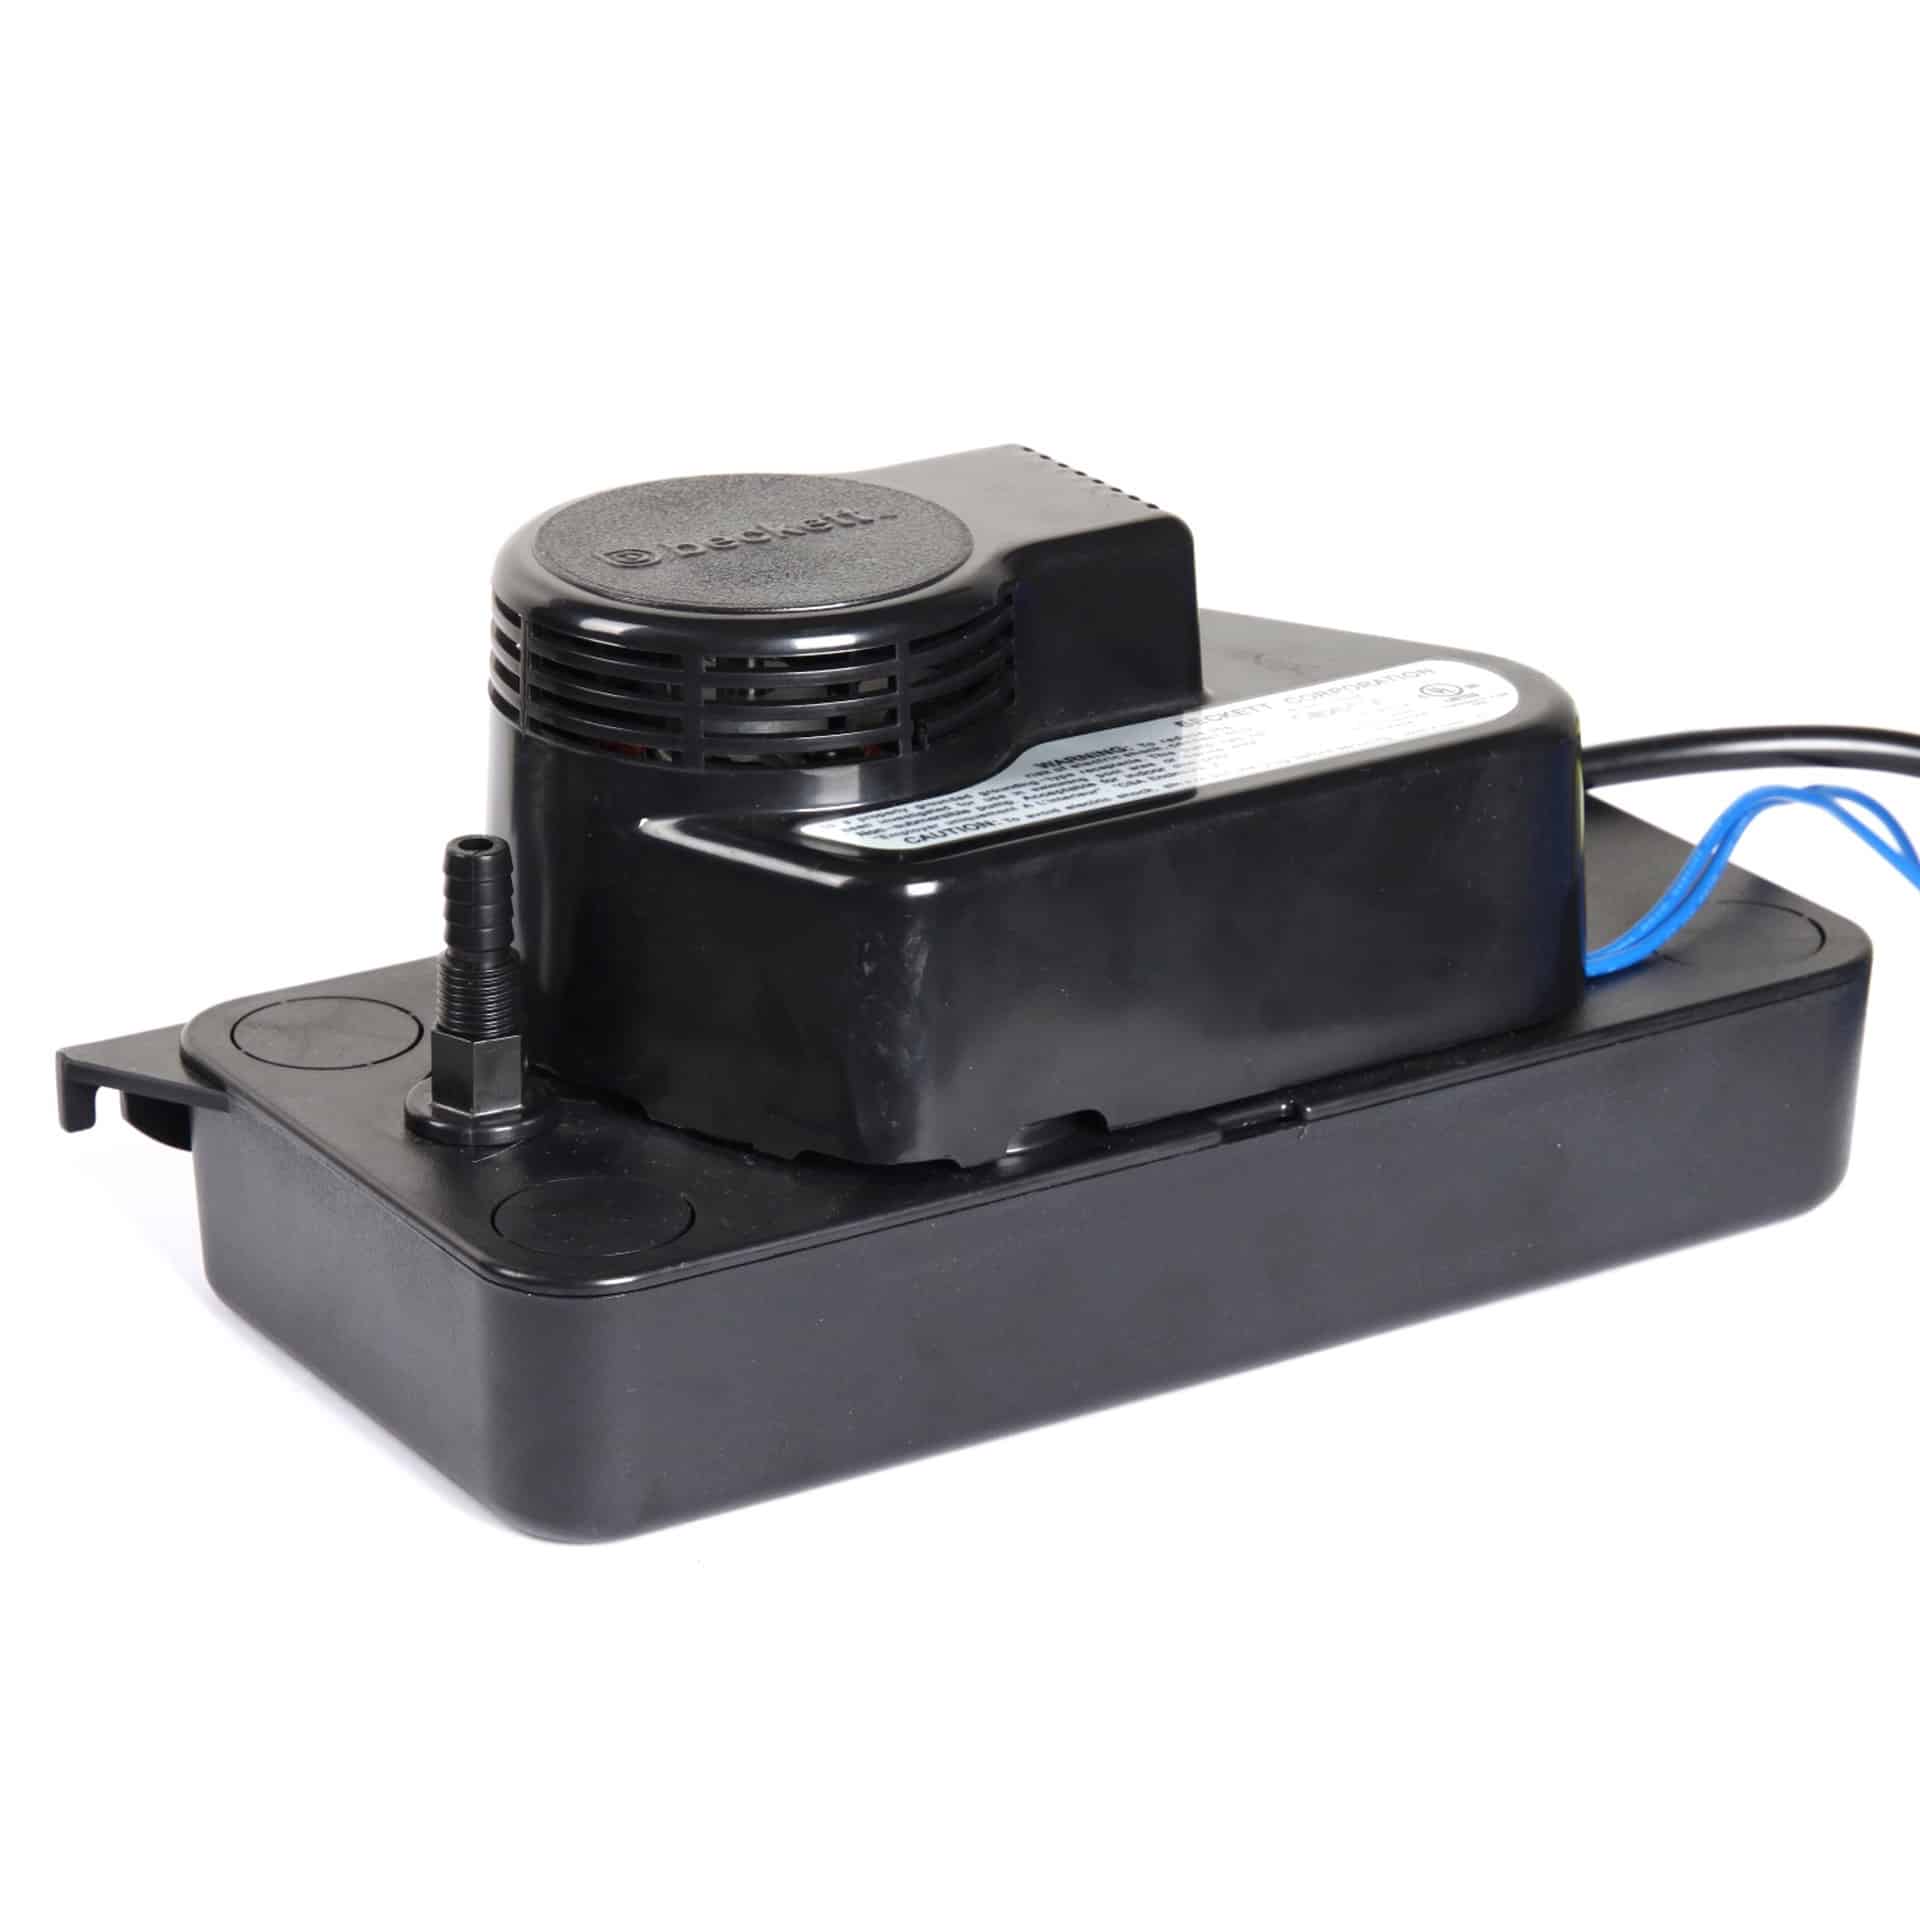 CL202ULHT – Low Profile High Temp Condensate Pump, 230V, 20 Ft Max Lift, Rated to 190° F